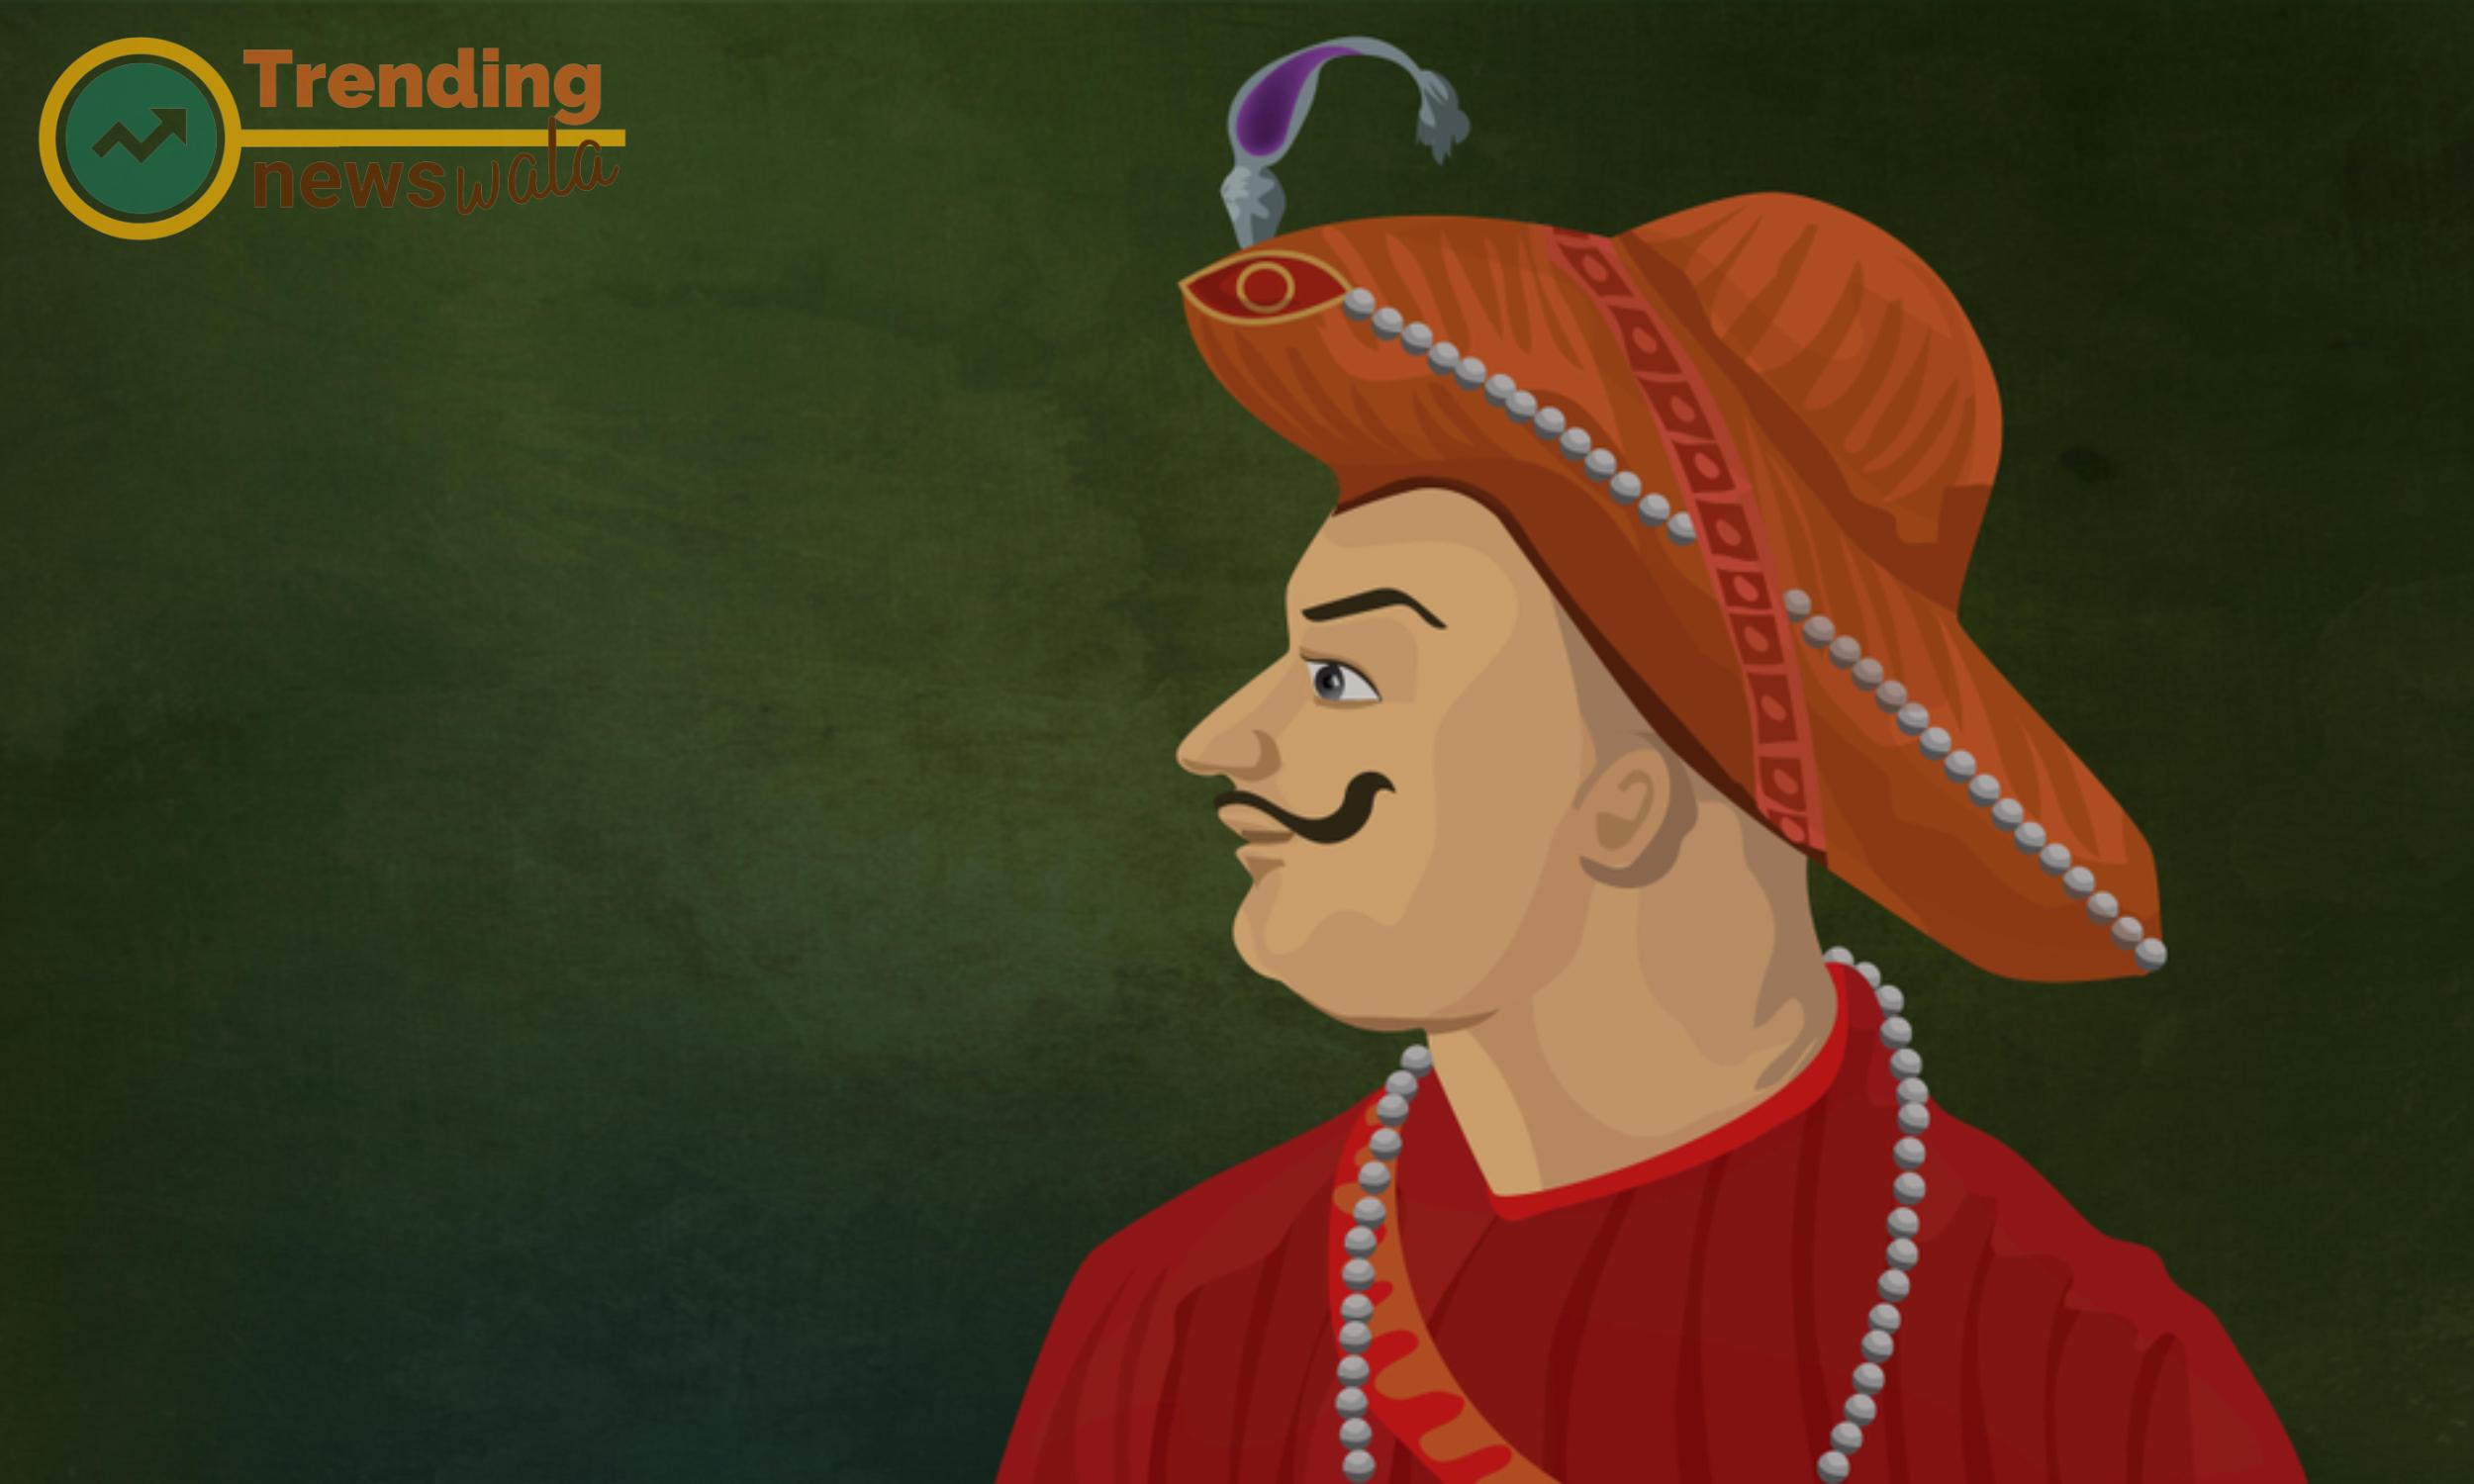 Tipu Sultan, born in 1750, ascended to the throne of Mysore in 1782